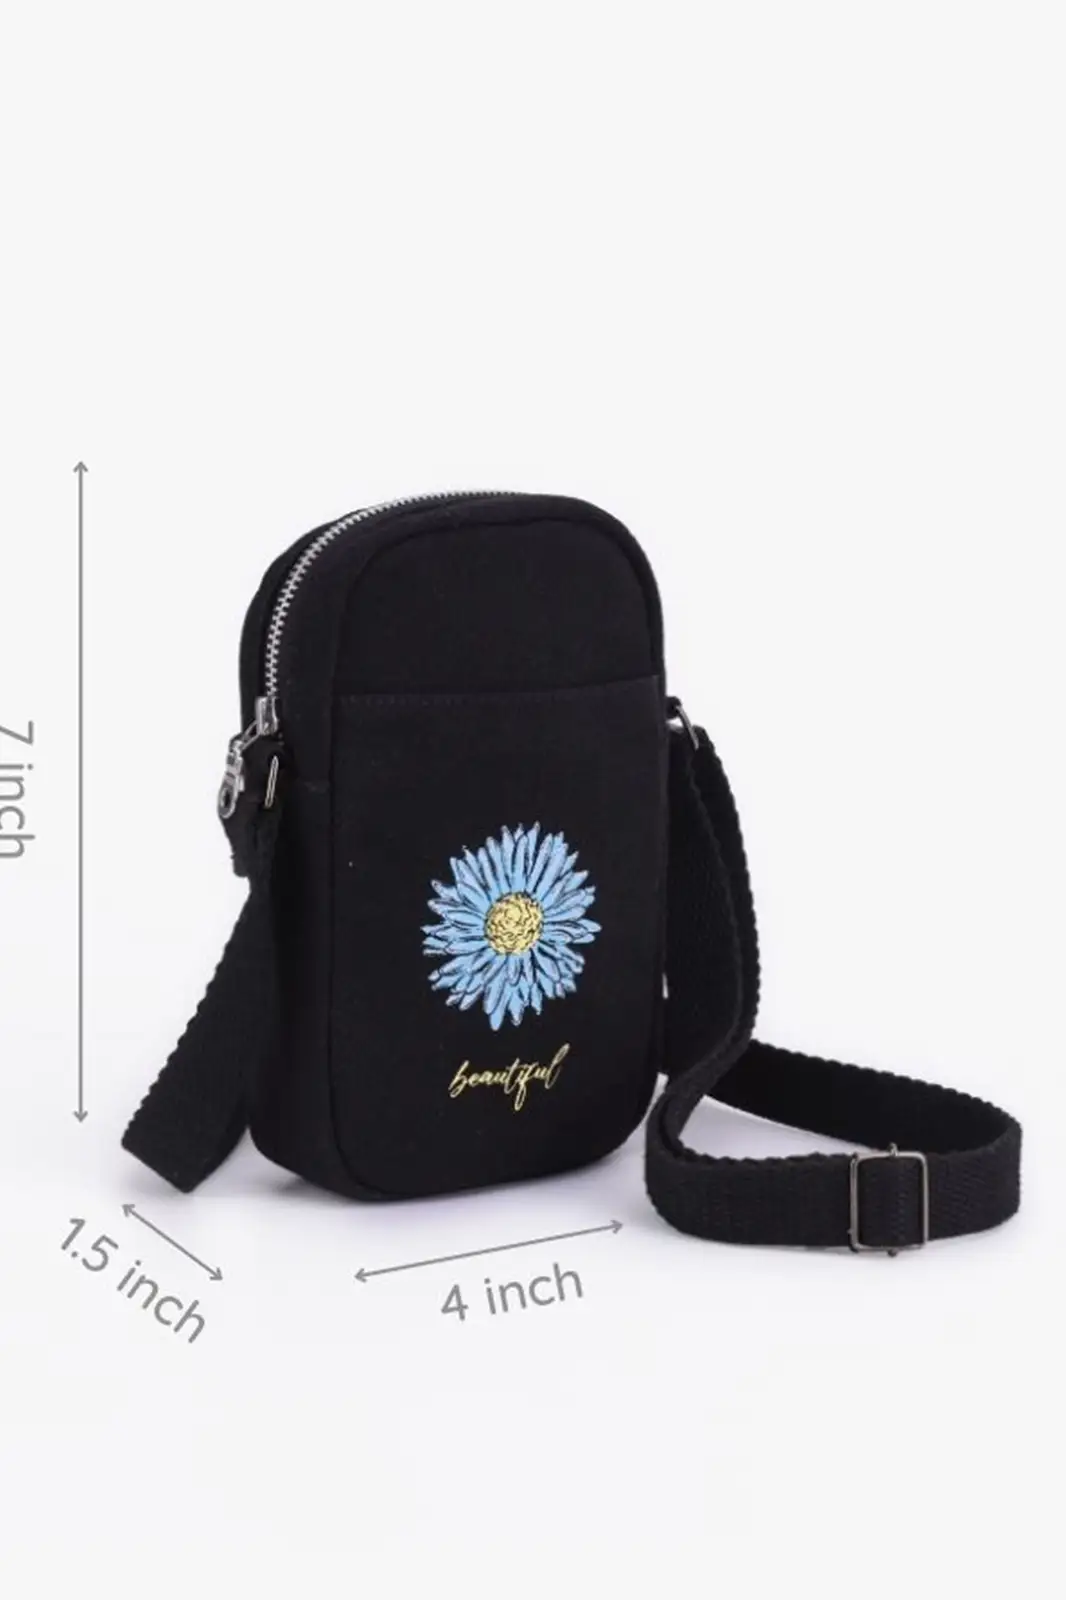 the phone bag flora, phone bag pouch, mobile phone bag, phone bag for ladies, phone bag crossbody, phone bag sling, smart phone bag, waist bag for woman, waist bag pack, waist pouch for women, travel waist bag, waist pouch, organic cotton waist pouch, pouch waist bag, waist bag belt bag, fashion waist bag, stylish waist bag, waist bag small, best waist bag, waist bag fashion, women’s waist pouch, waist pouch for women